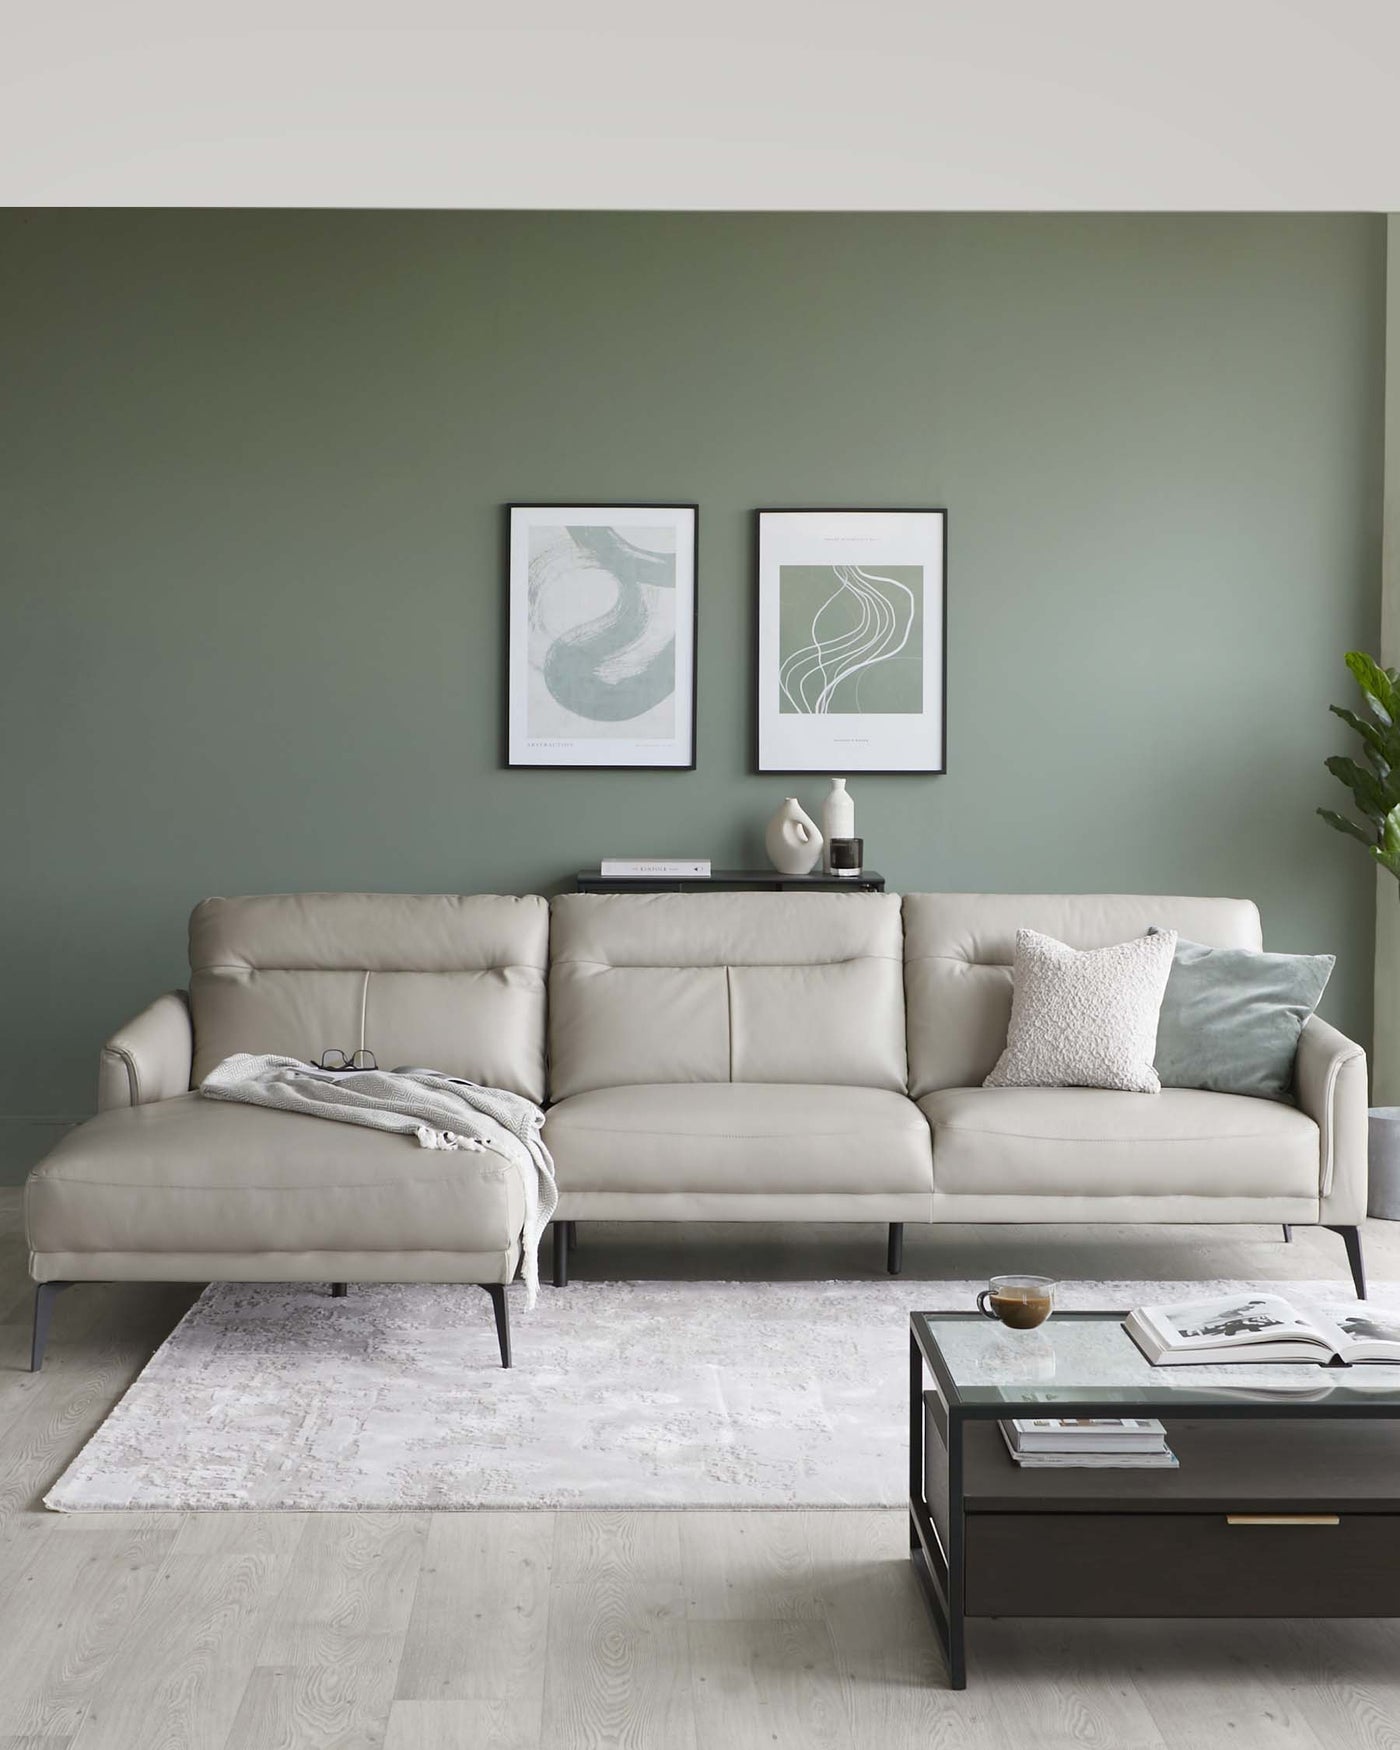 Modern light grey sectional sofa with chaise on the left side, featuring clean lines and plush cushions, positioned on an off-white distressed area rug. A rectangular black coffee table with a glass top and lower shelf sits in front of the sofa, accessorized with books and a cup.